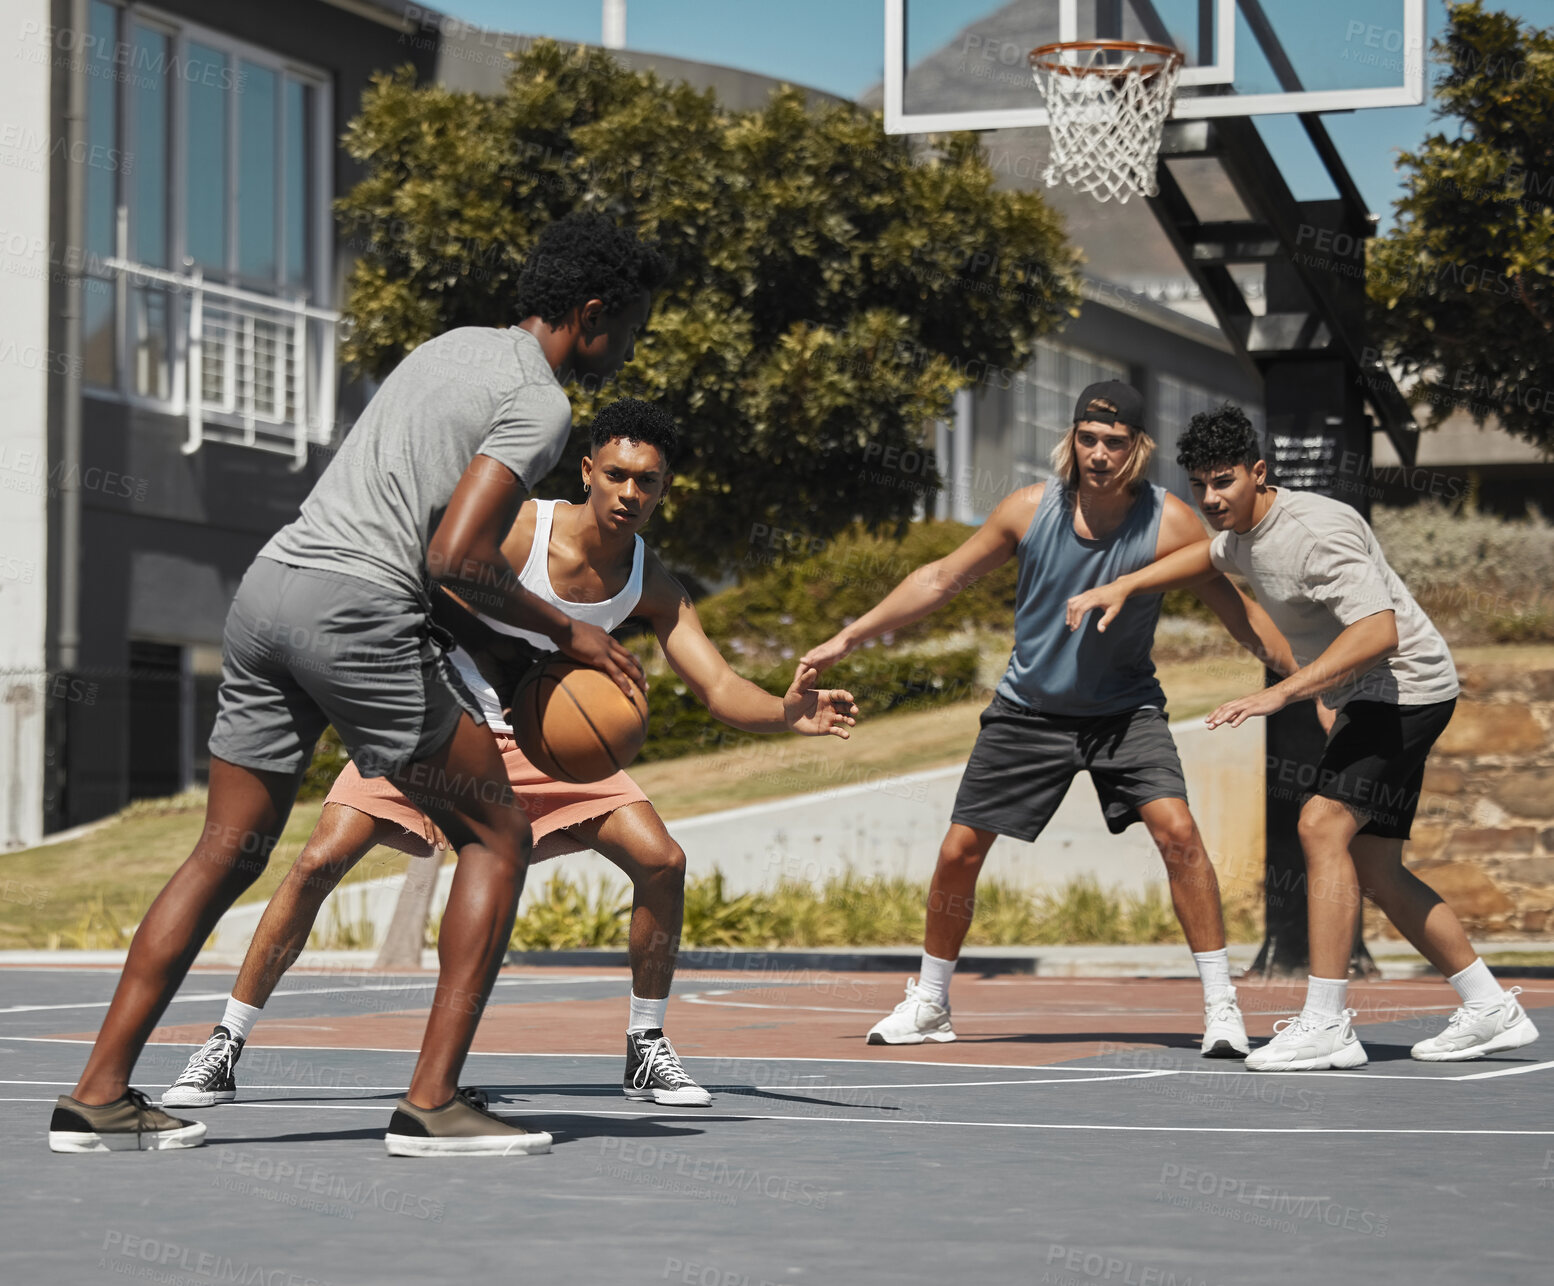 Buy stock photo Basketball, fitness and men in sports game for exercise, workout or training on the court in the outdoors. Active athletic players in sport match playing ball together for healthy fun cardio outside